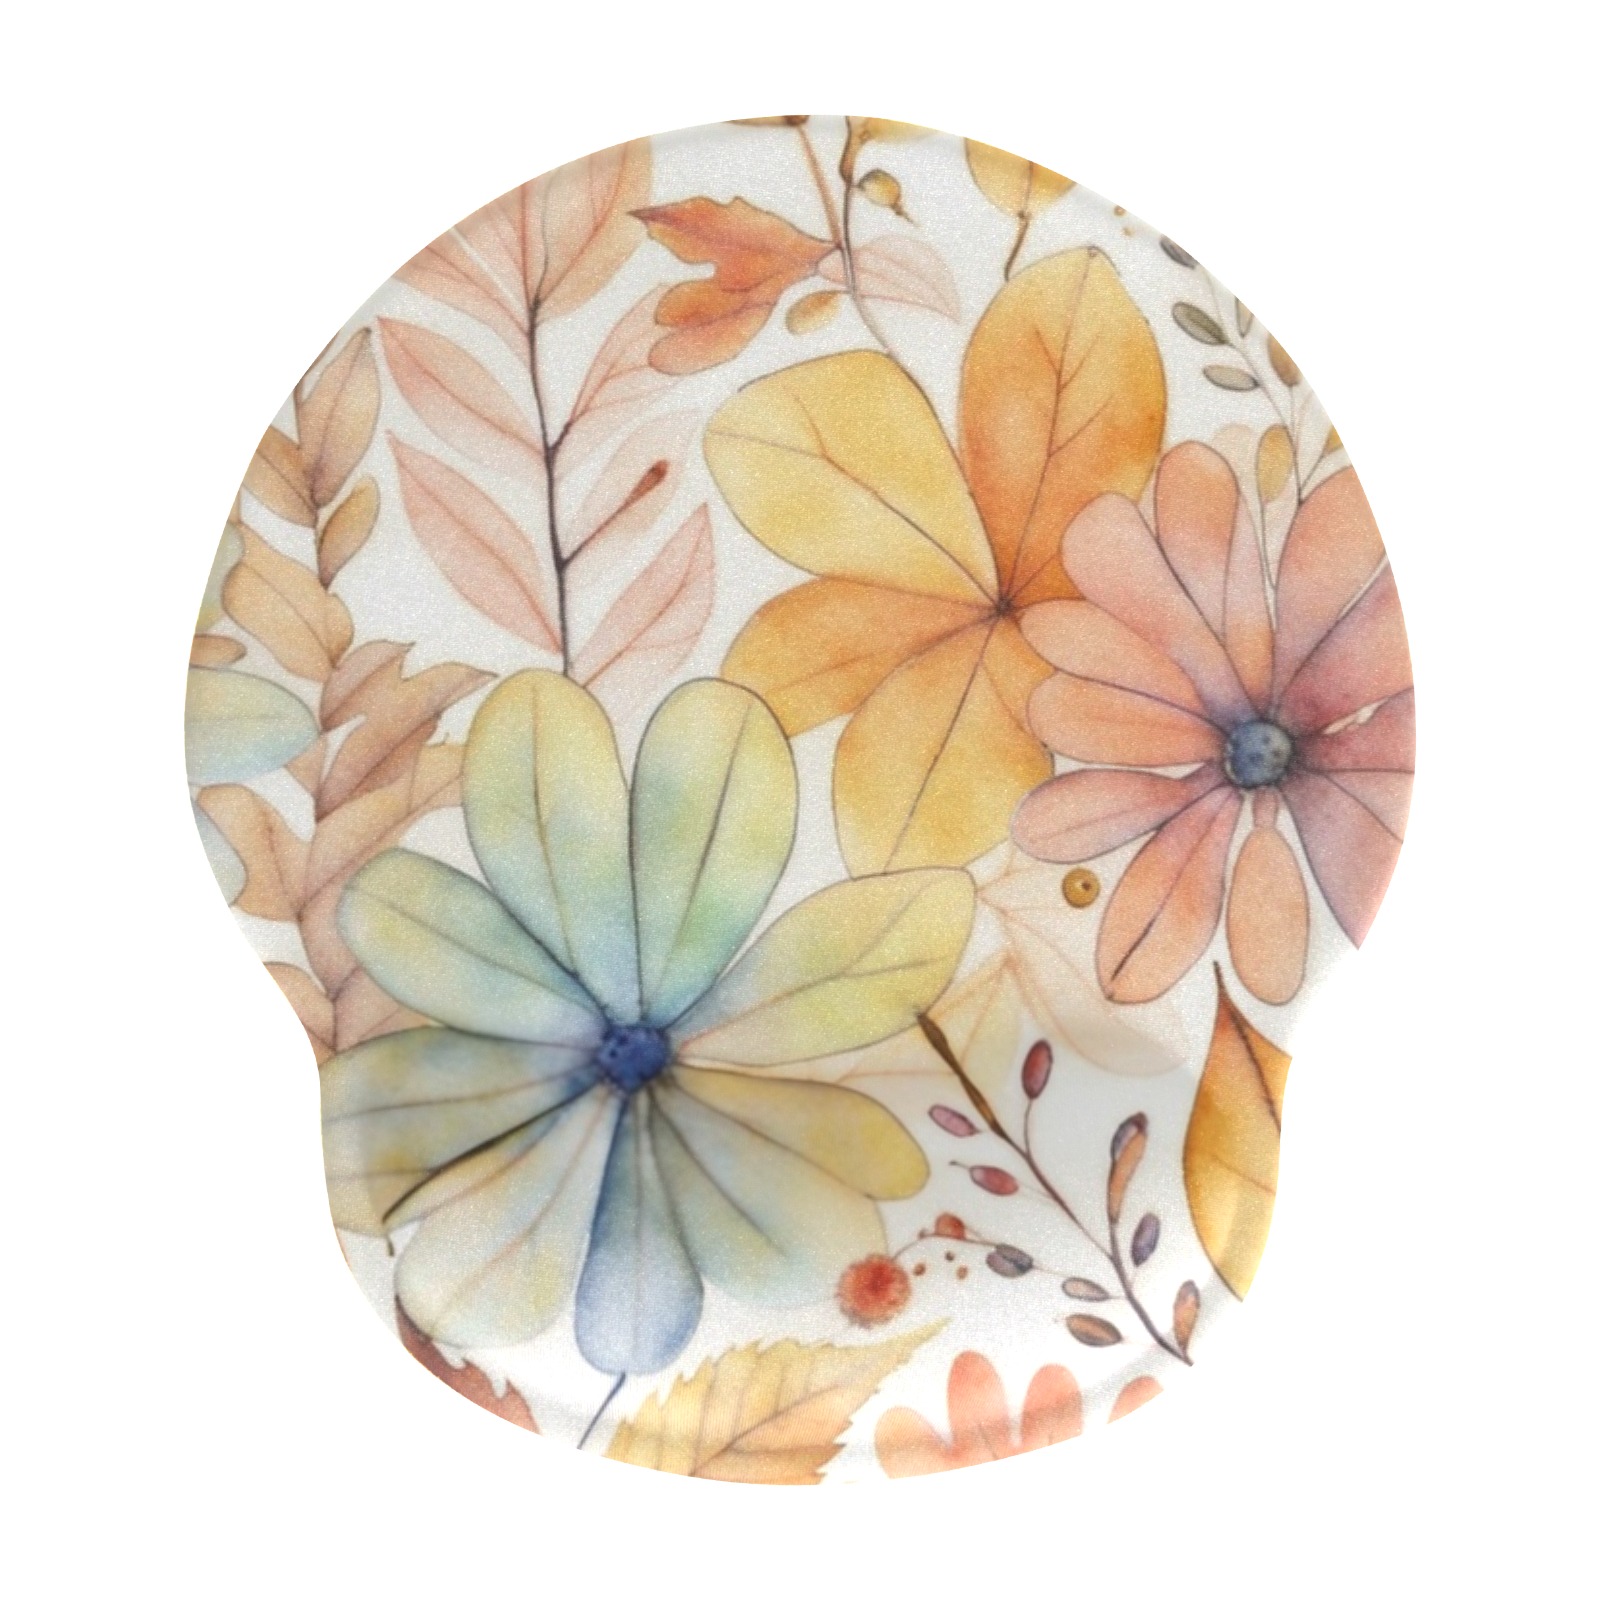 Watercolor Floral 2 Mouse Pad with Wrist Rest Support